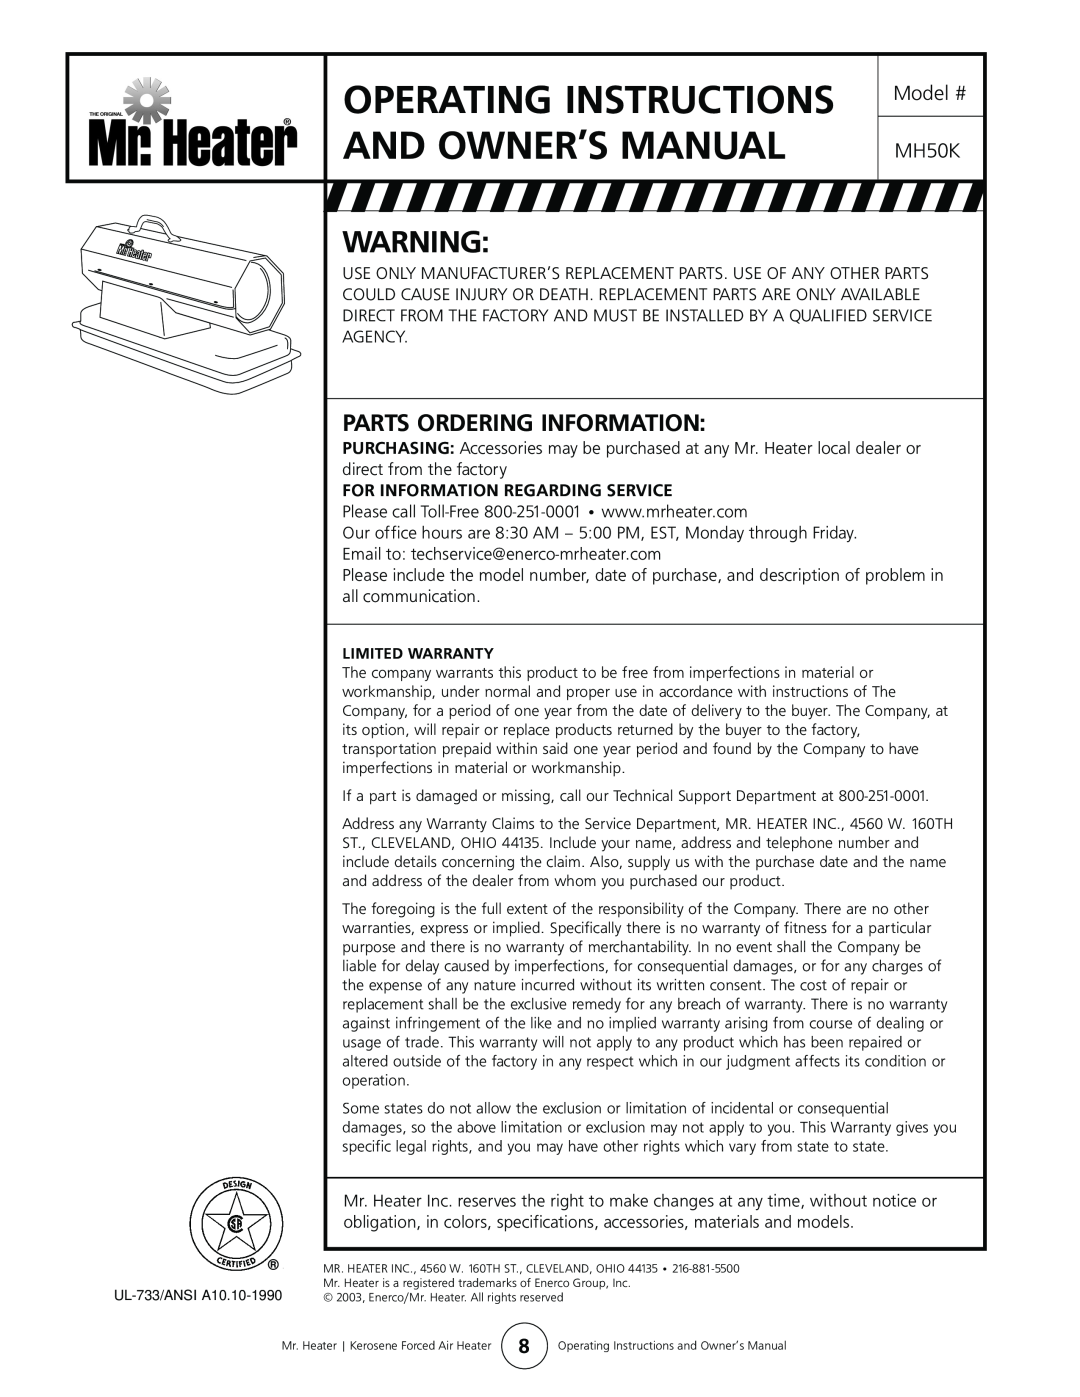 Mr. Heater MH50K operating instructions Parts Ordering Information, For Information Regarding Service 